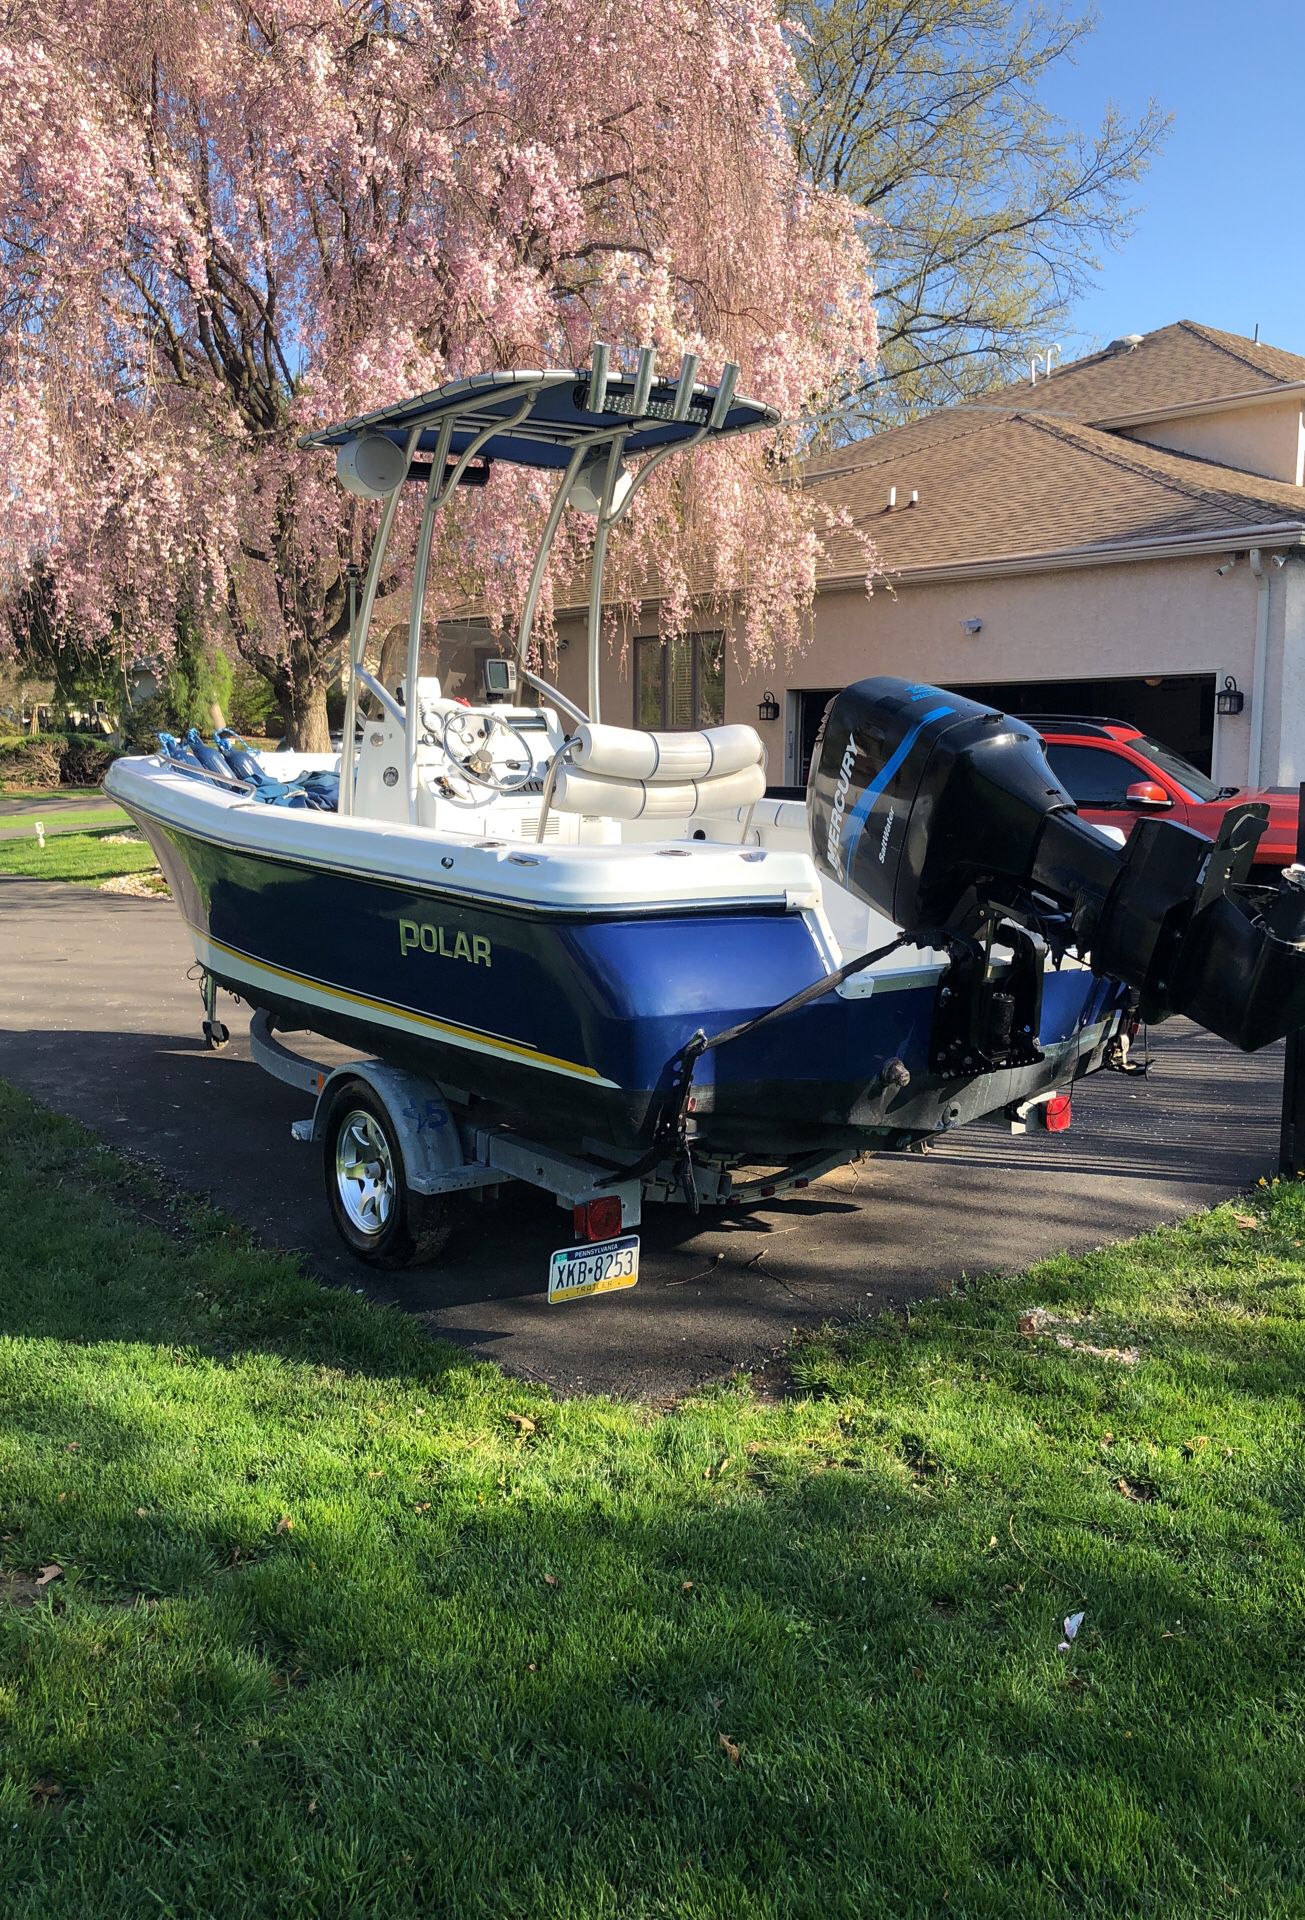 2004 Polar Center console boat 19 foot with trailer .